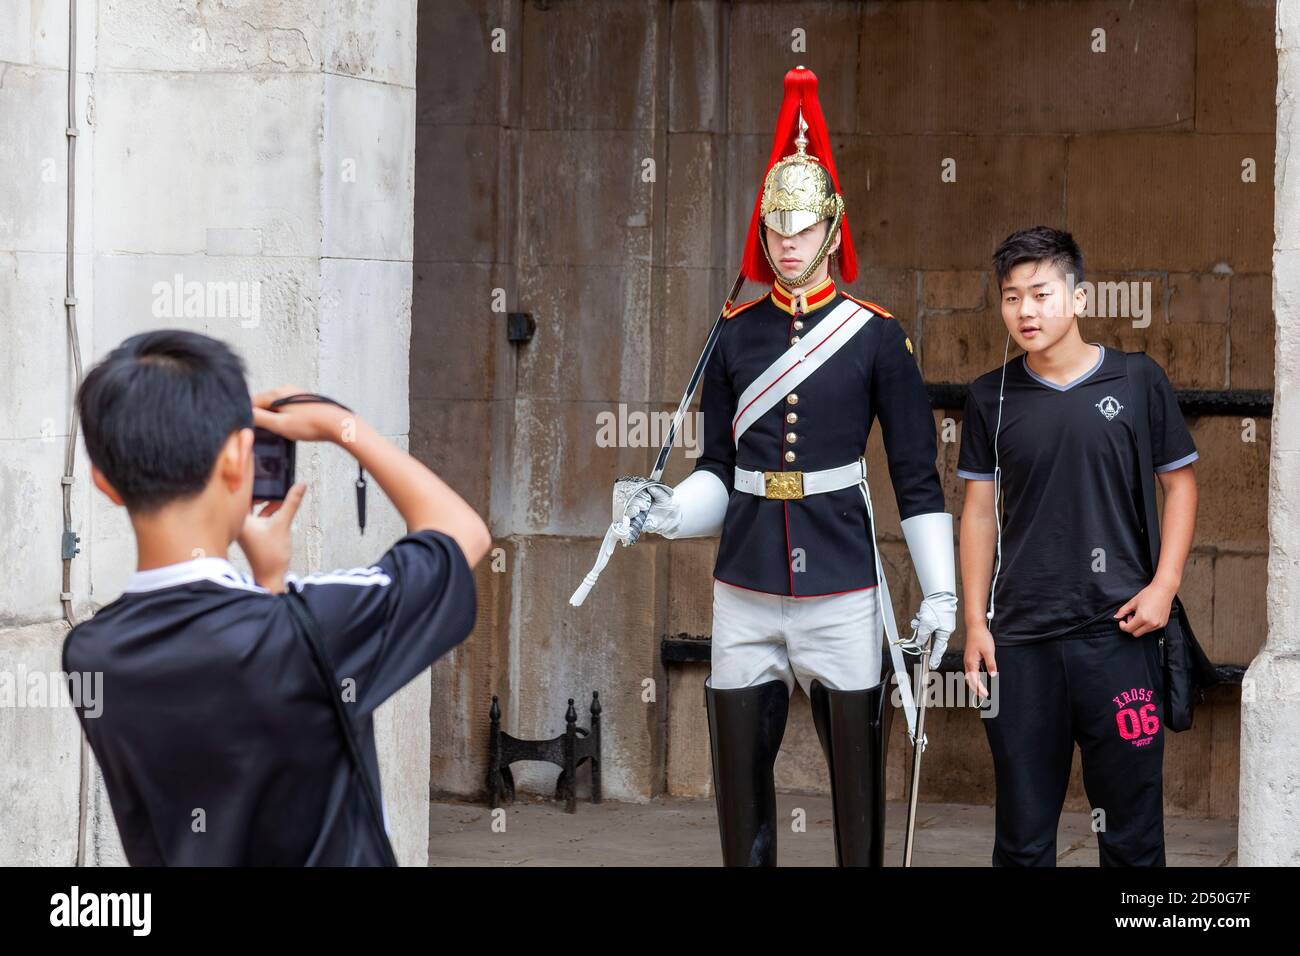 London, UK, July 1, 2012 : Household cavalry soldier on guard at Horse Guards Parade in Whitehall being photographed by tourists which is a popular tr Stock Photo